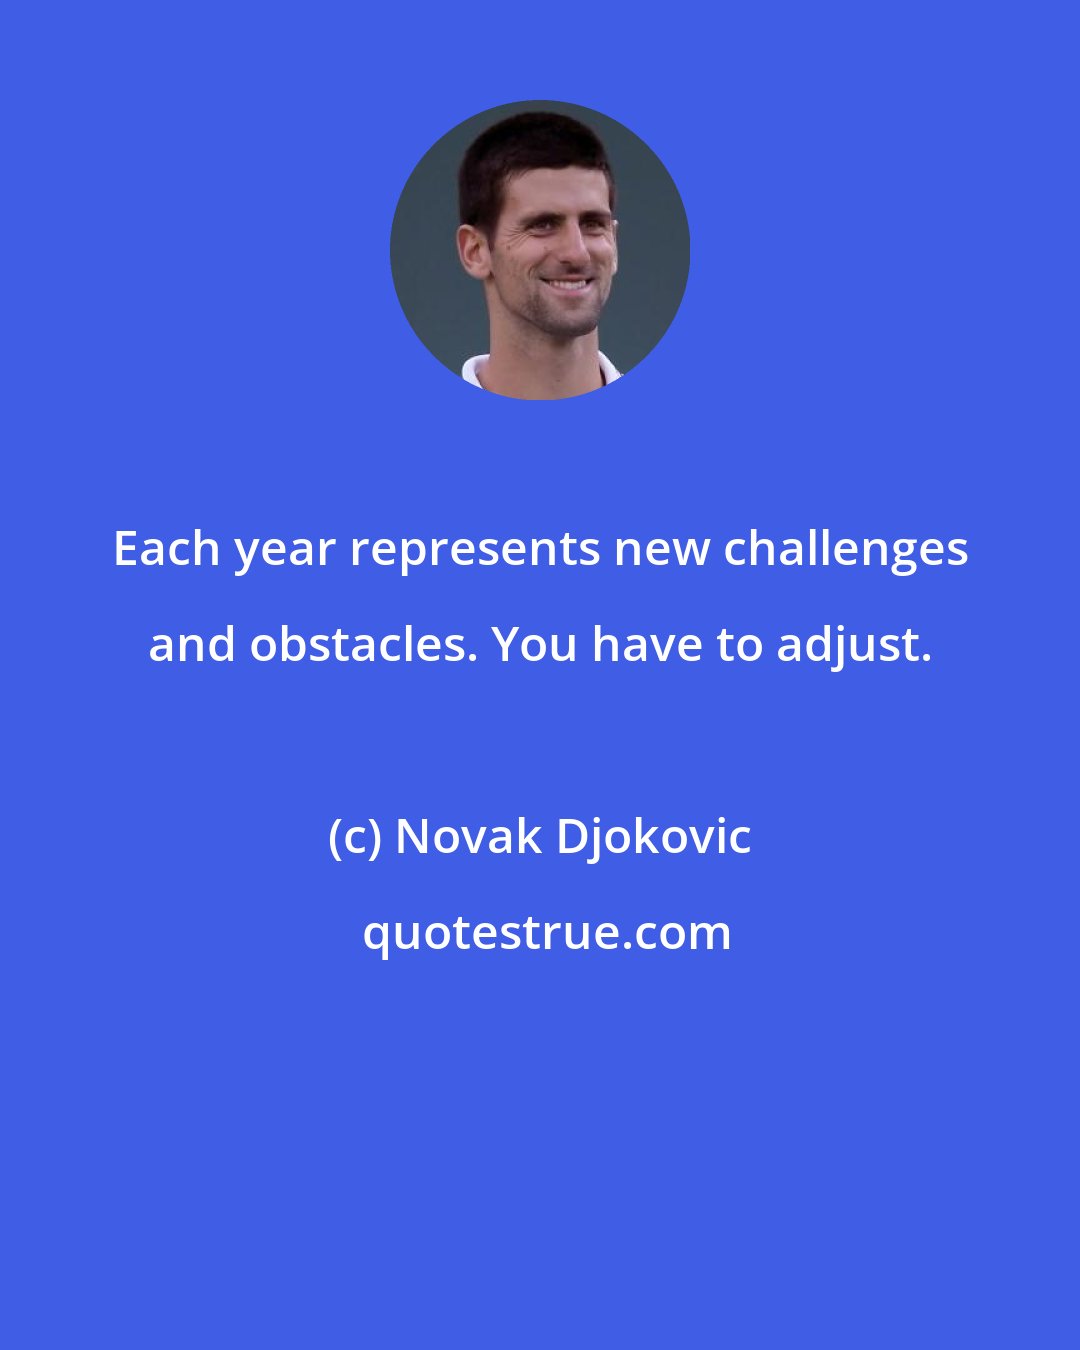 Novak Djokovic: Each year represents new challenges and obstacles. You have to adjust.